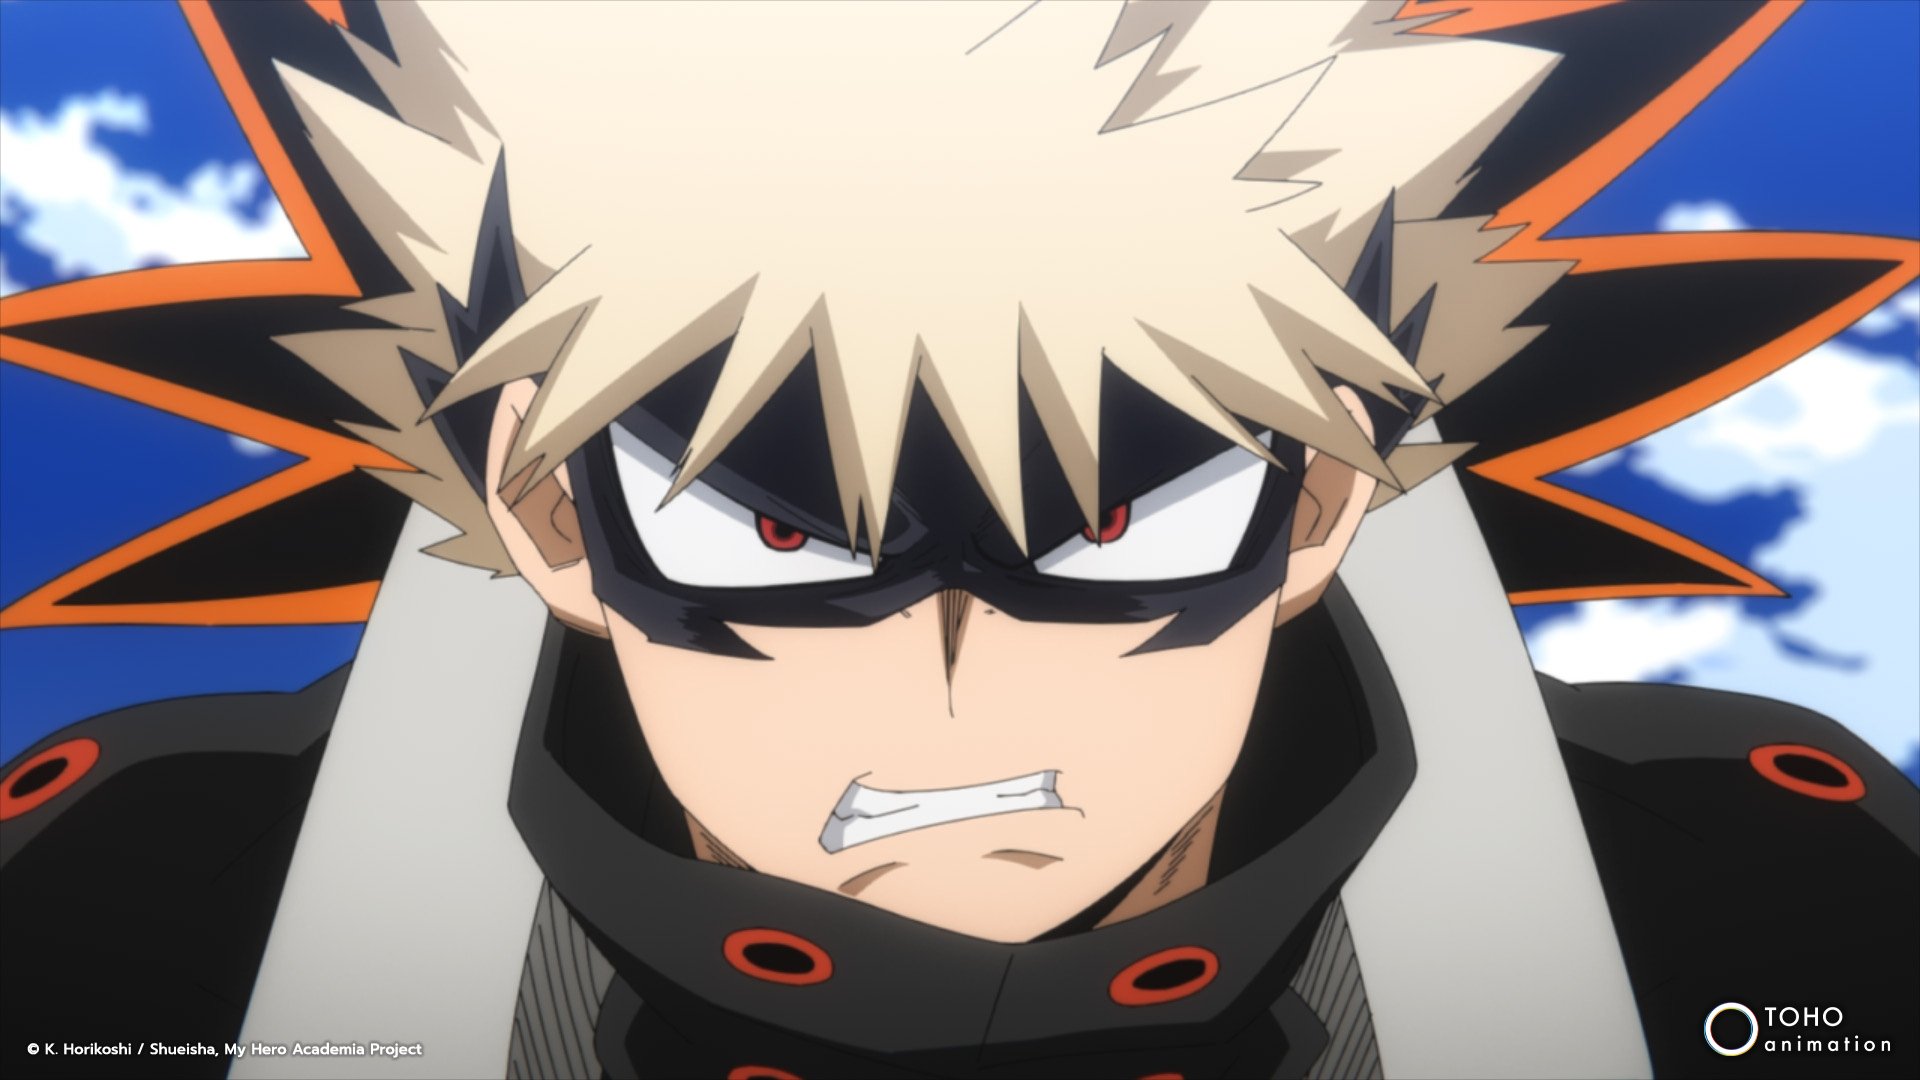 Katsuki Bakugo in 'My Hero Academia' for our article about season 6 episode 9. He's wearimg his hero mask and costume and looks angry.